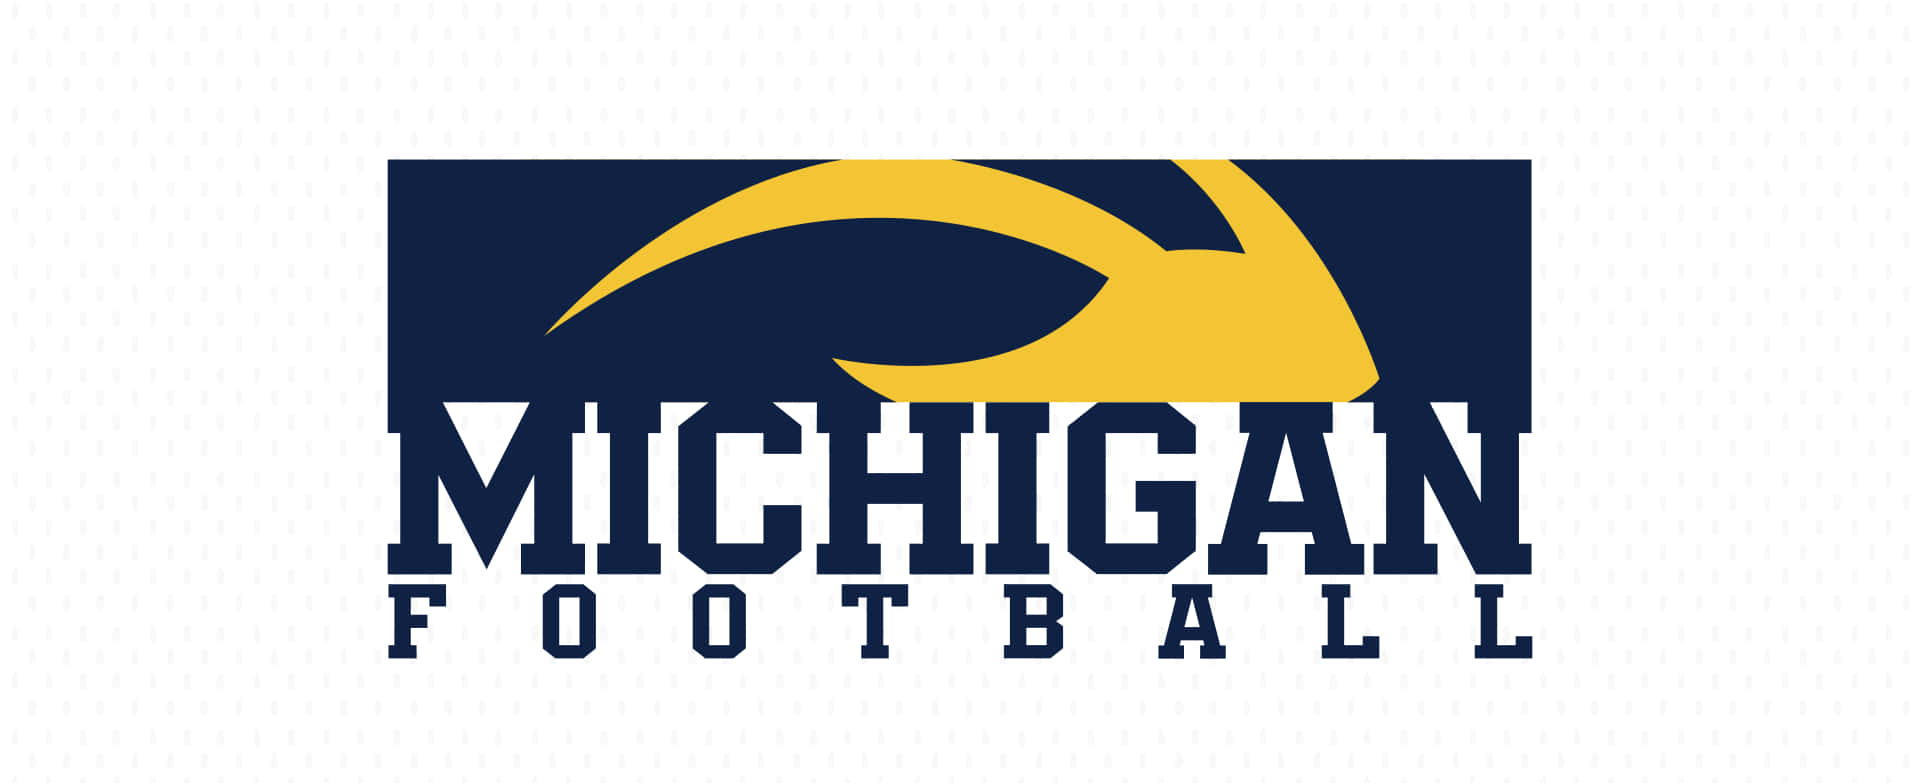 Michigan Wolverines Football Ready for Victory Wallpaper